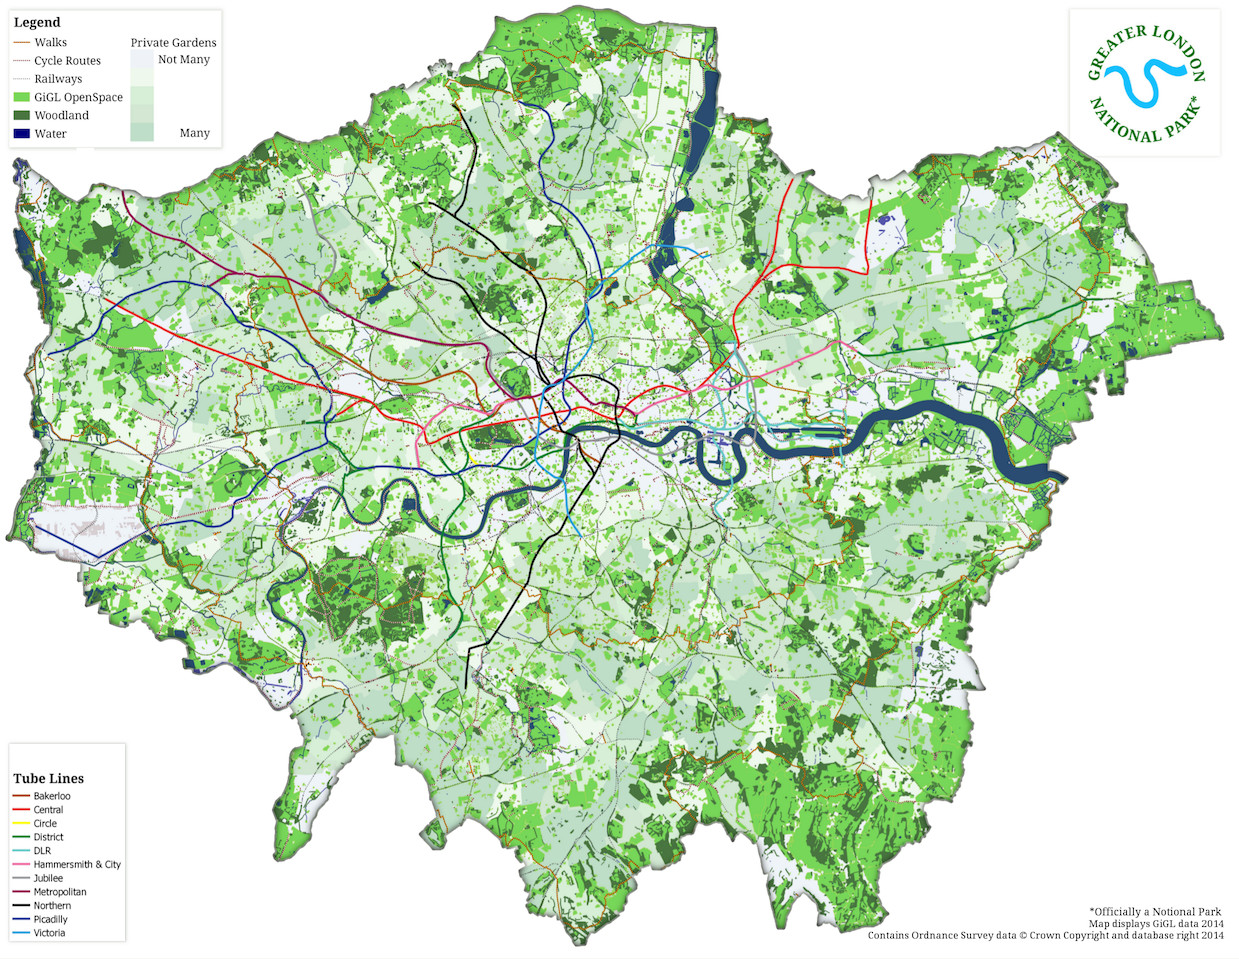 Greater London National Park